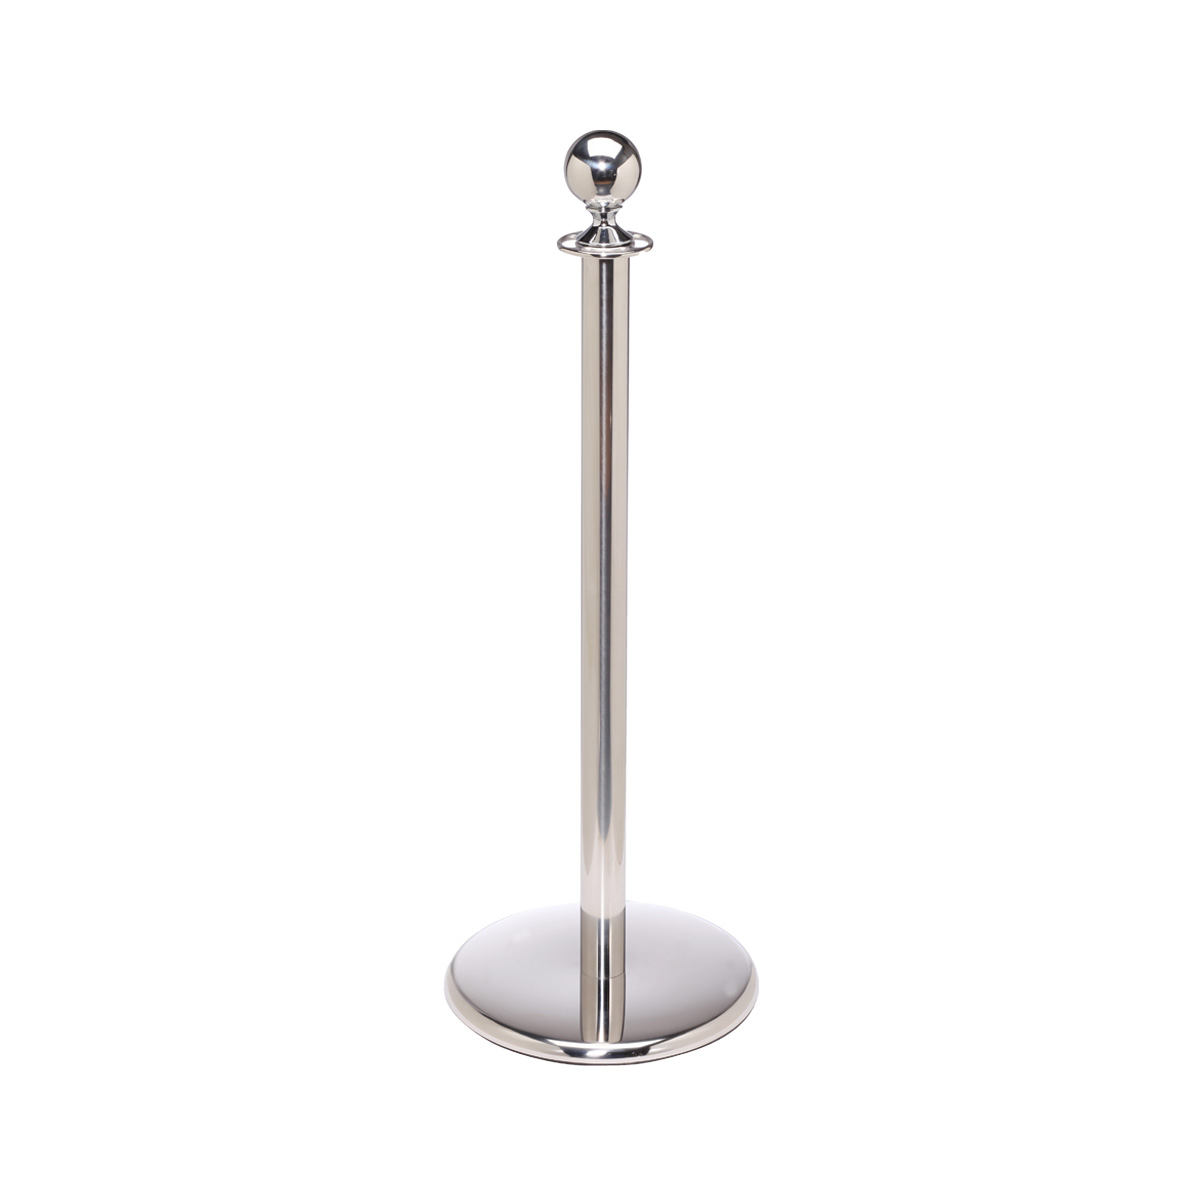 Elegance Pole And Rope Barriers Stainless Steel Stanchion And Ball Top